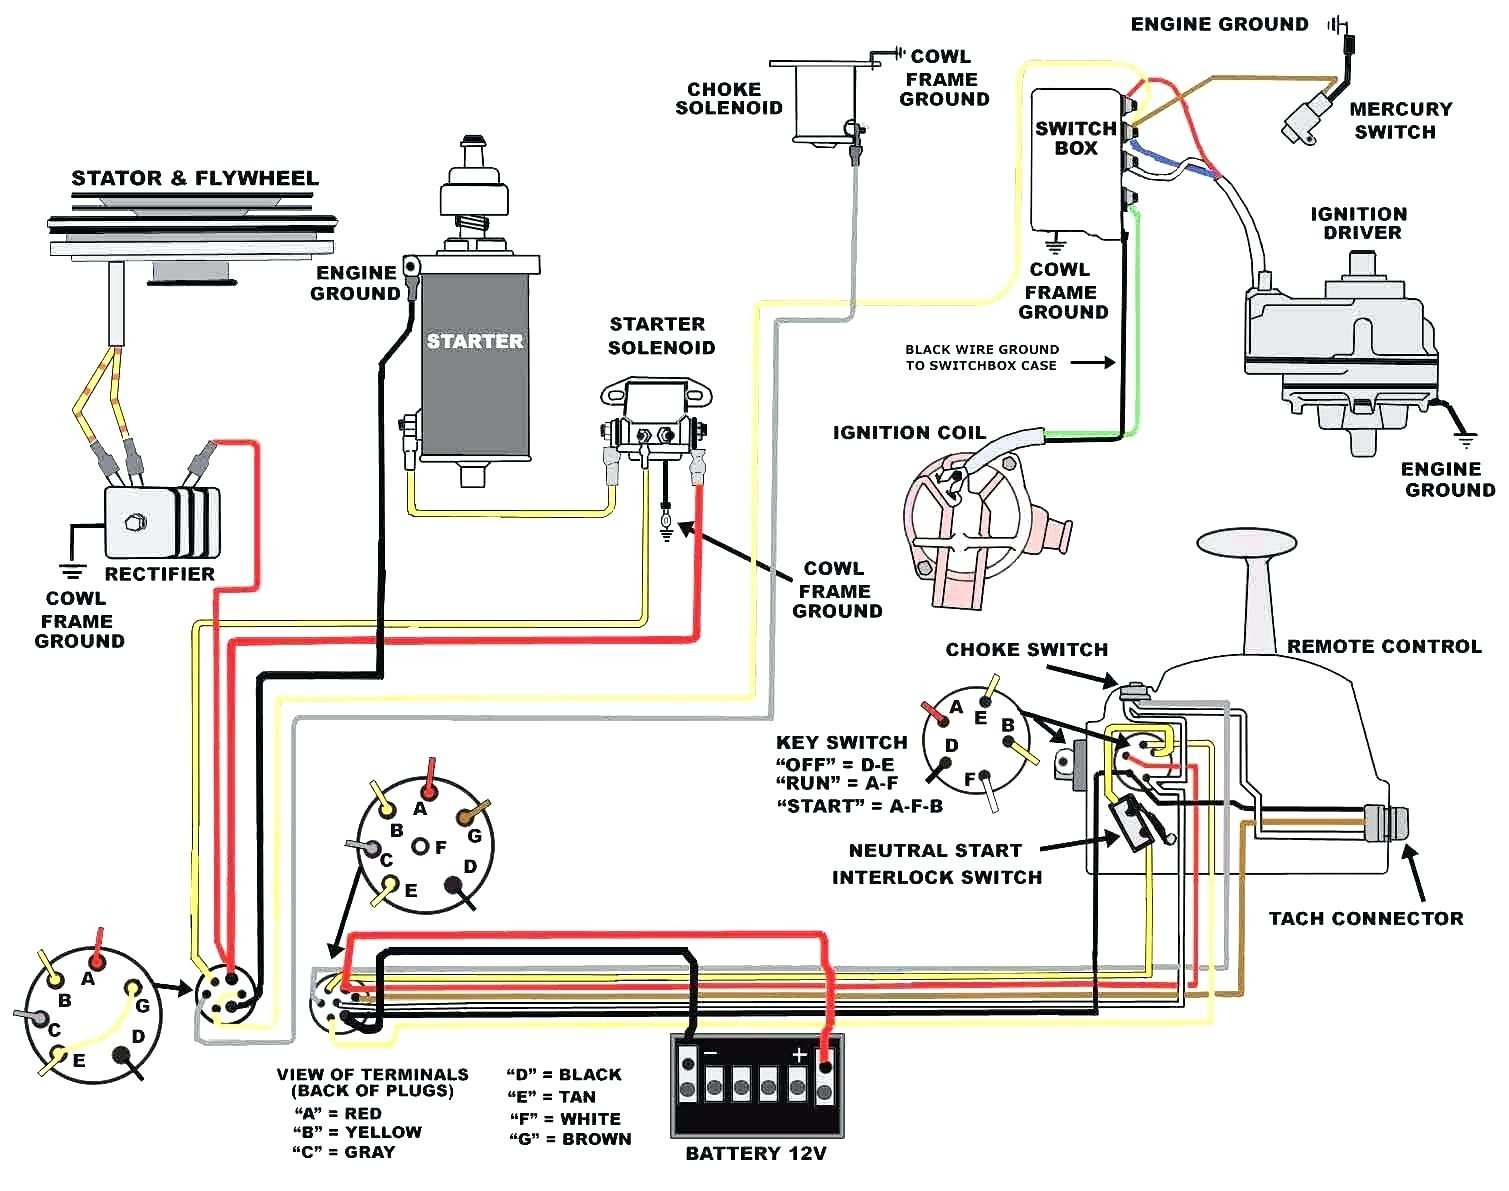 Universal Ignition Wiring Diagram | Manual E-Books - Universal Ignition Switch Wiring Diagram